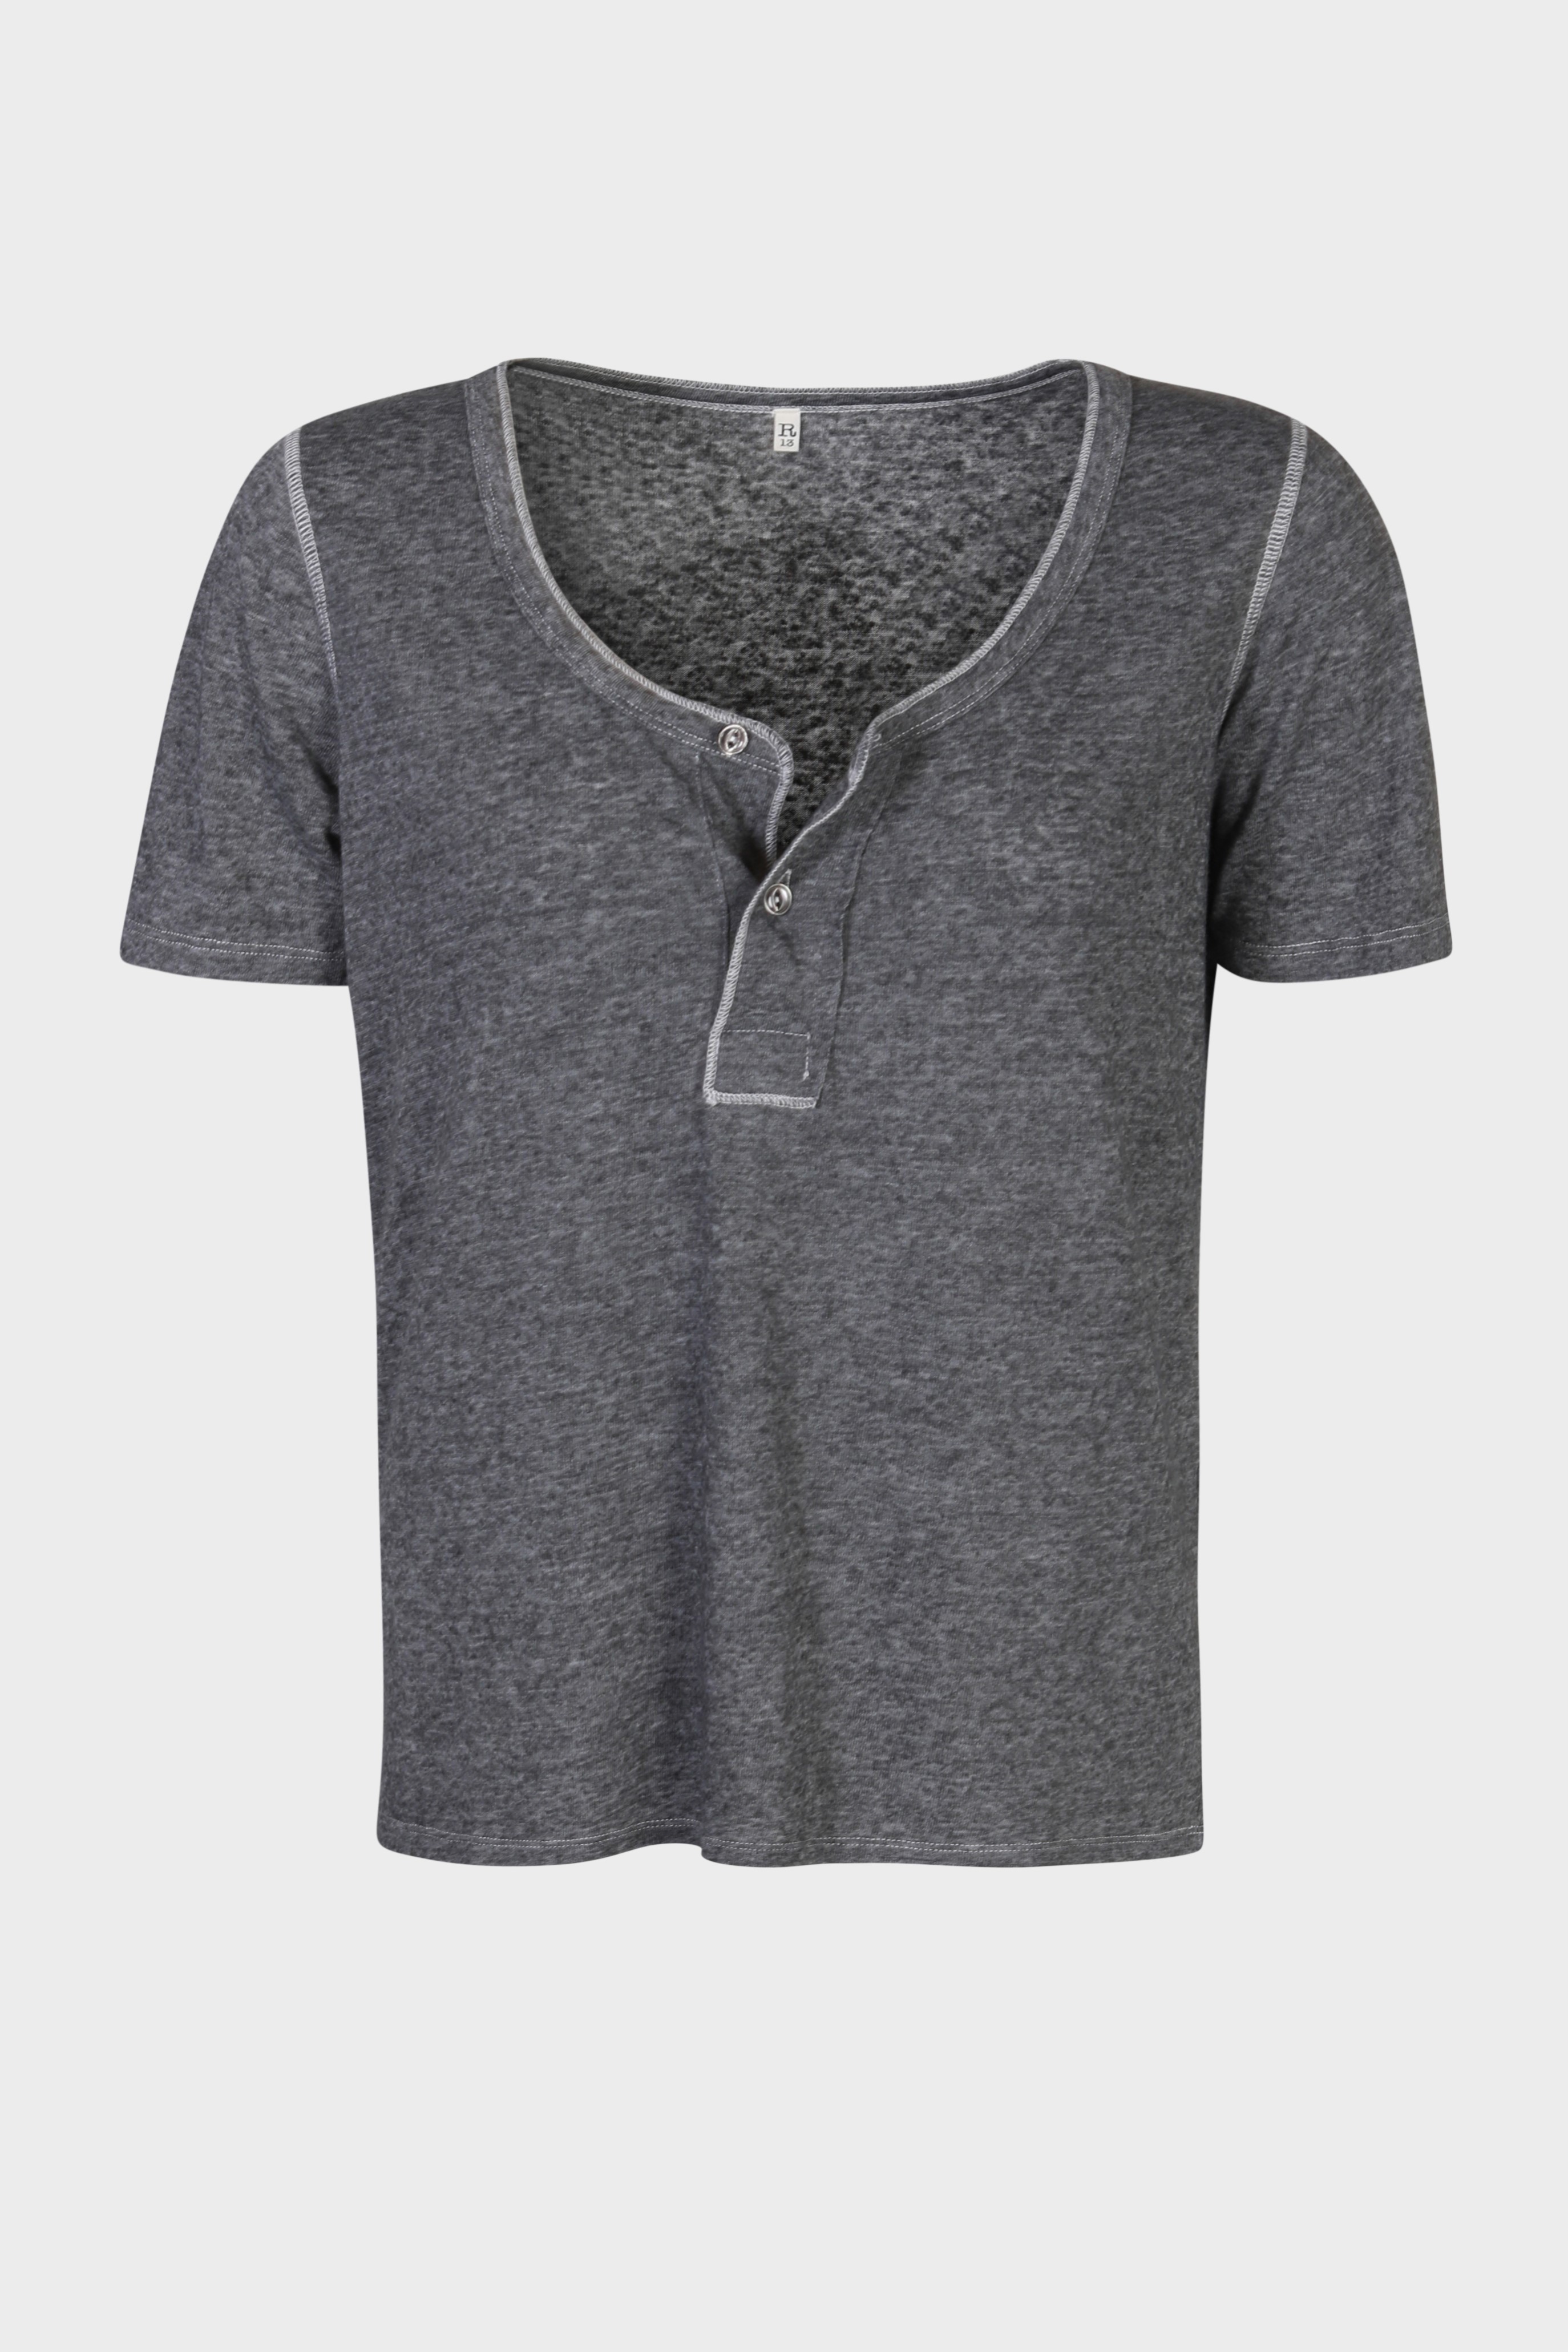 R13 Low Neck Henley Tee in Charcoal S